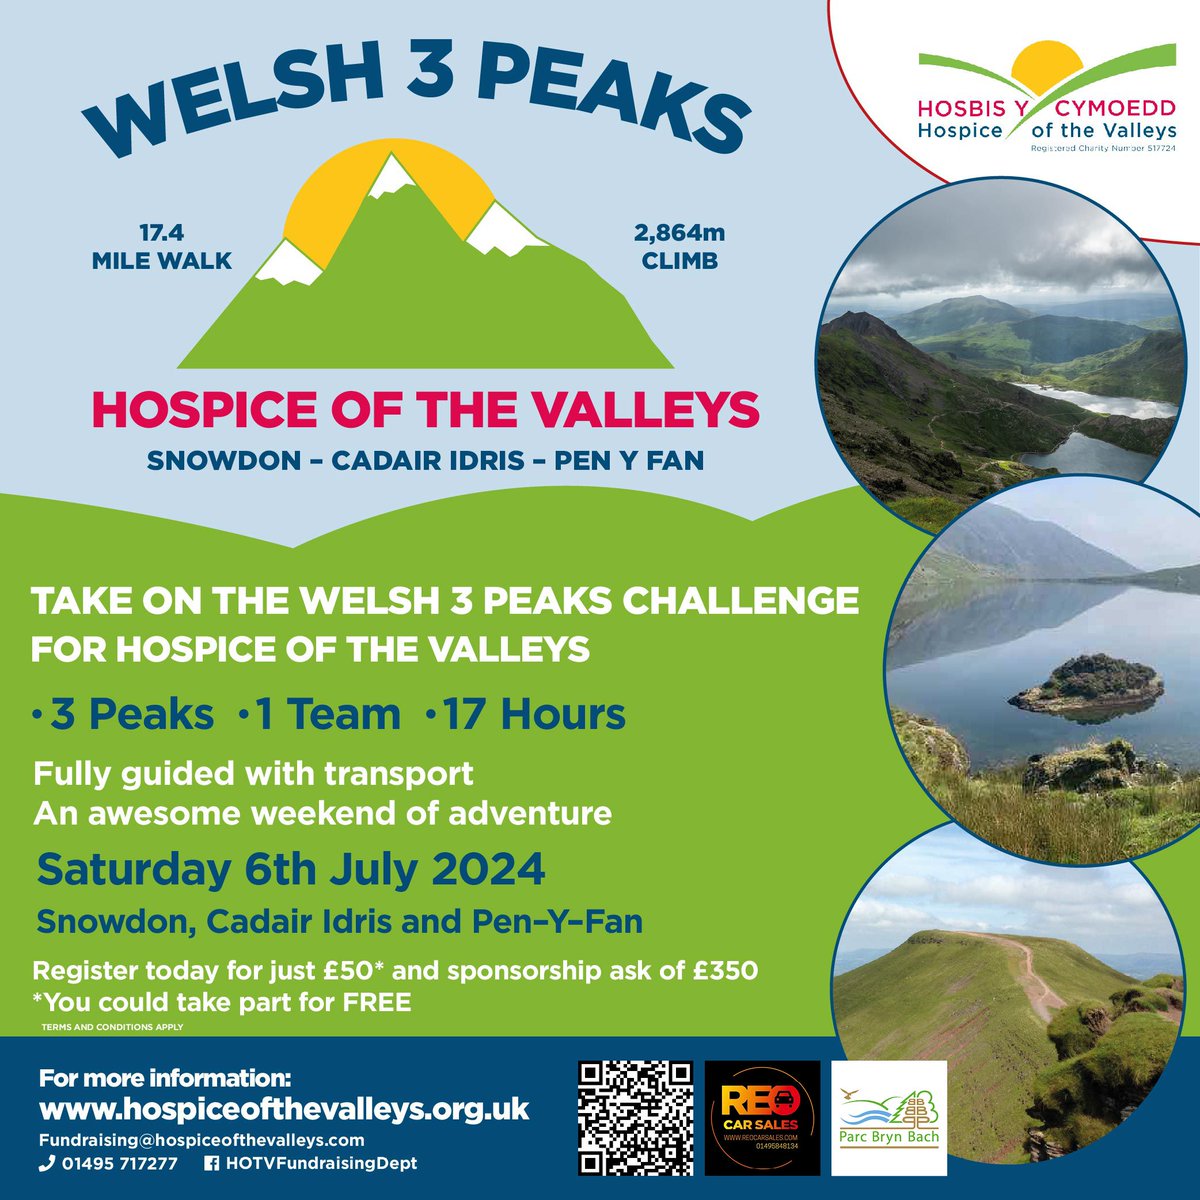 Hospice of the Valleys WELSH 3 PEAKS CHALLENGE Saturday 6th July 2024 – Snowdon, Cadair Idris and Pen-y-Fan

SIGN UP TODAY hospiceofthevalleys.org.uk/event/hospice-…
With special thanks to corporate sponsor REO Car Sales and Parc Bryn Bach
#welsh3peaks
#hospicewelsh3peaks